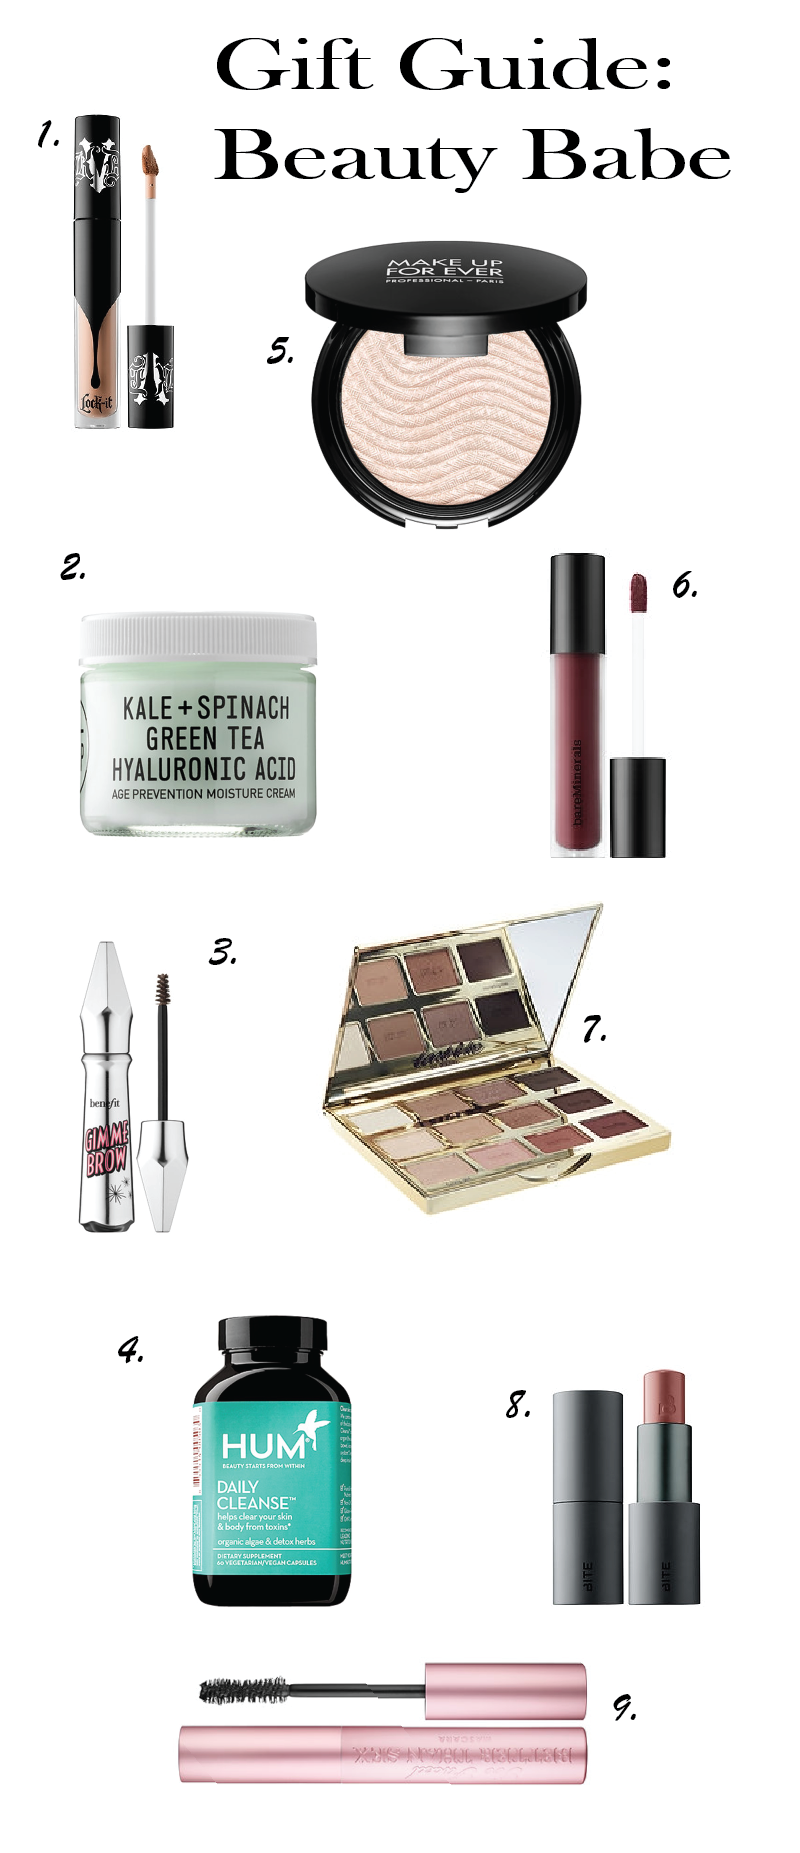 Gift Guide: Beauty Babe